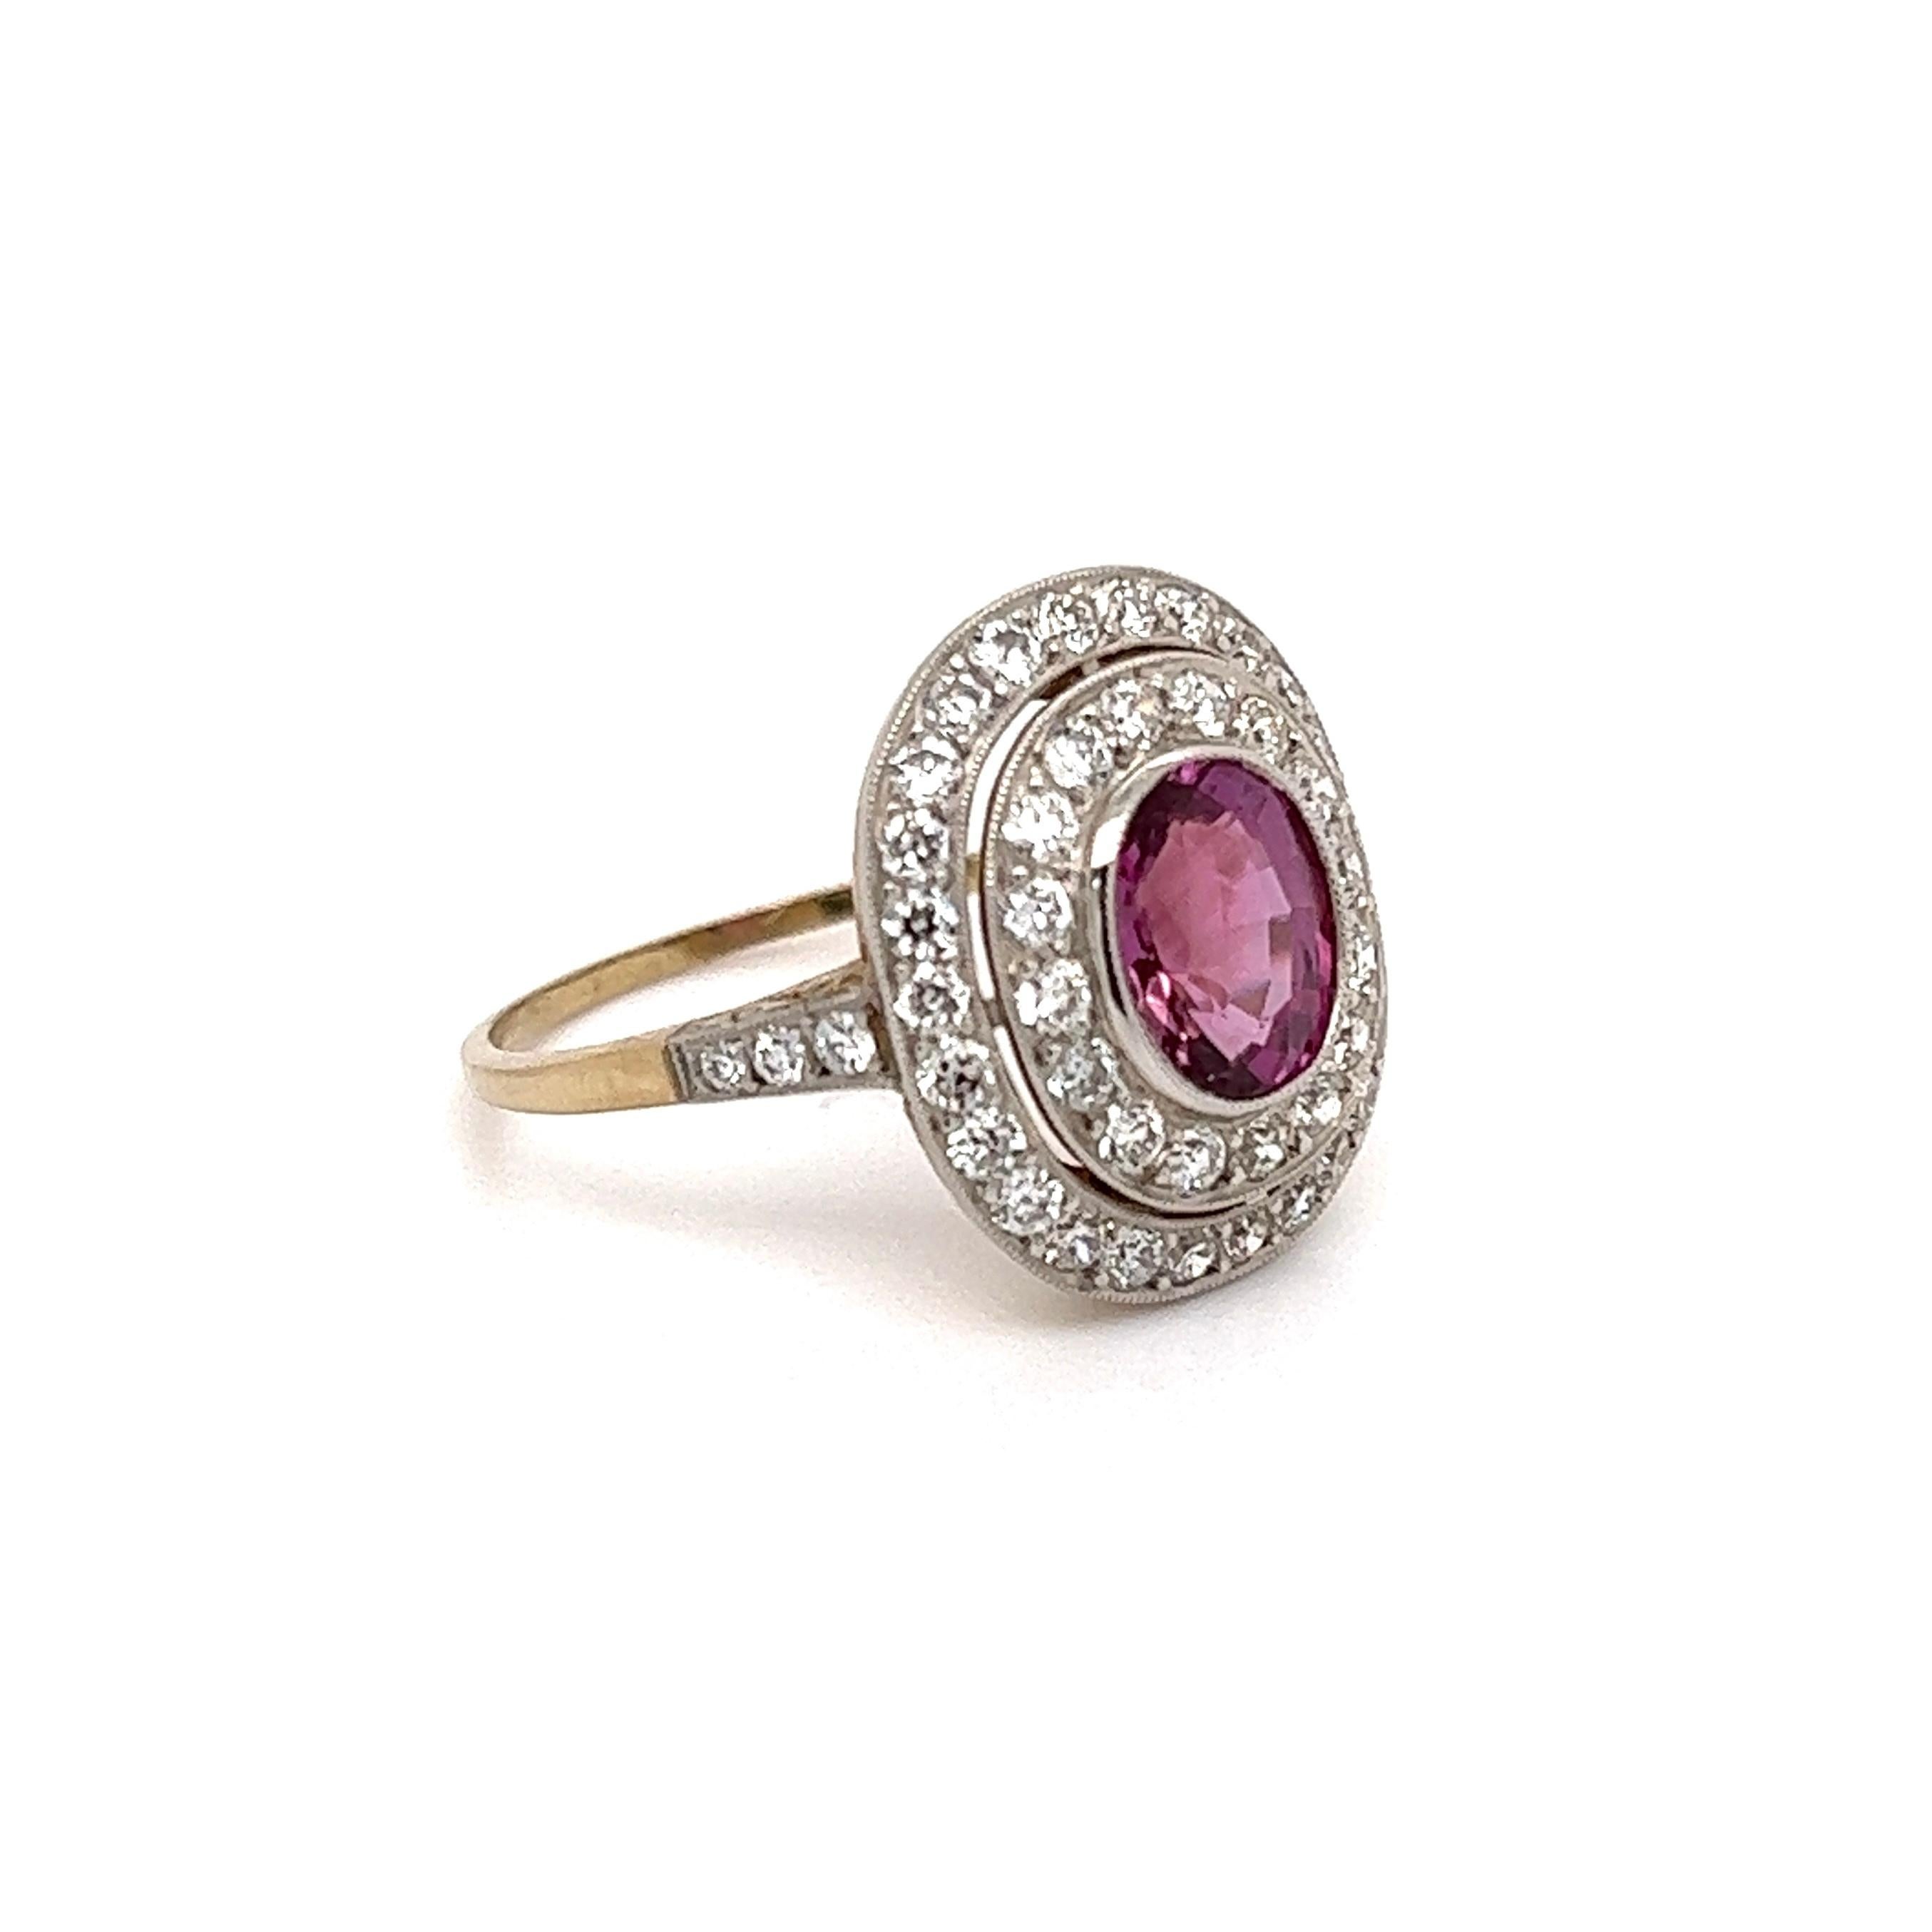 Simply Beautiful! Finely detailed Pink Sapphire and Double Diamond Platinum Art Deco Revival Cocktail Ring. Centering a securely nestled oval Pink Sapphire, weighing approx. 2.48 Carats surrounded by 1.10tcw Double Diamonds. Approx. dimensions: